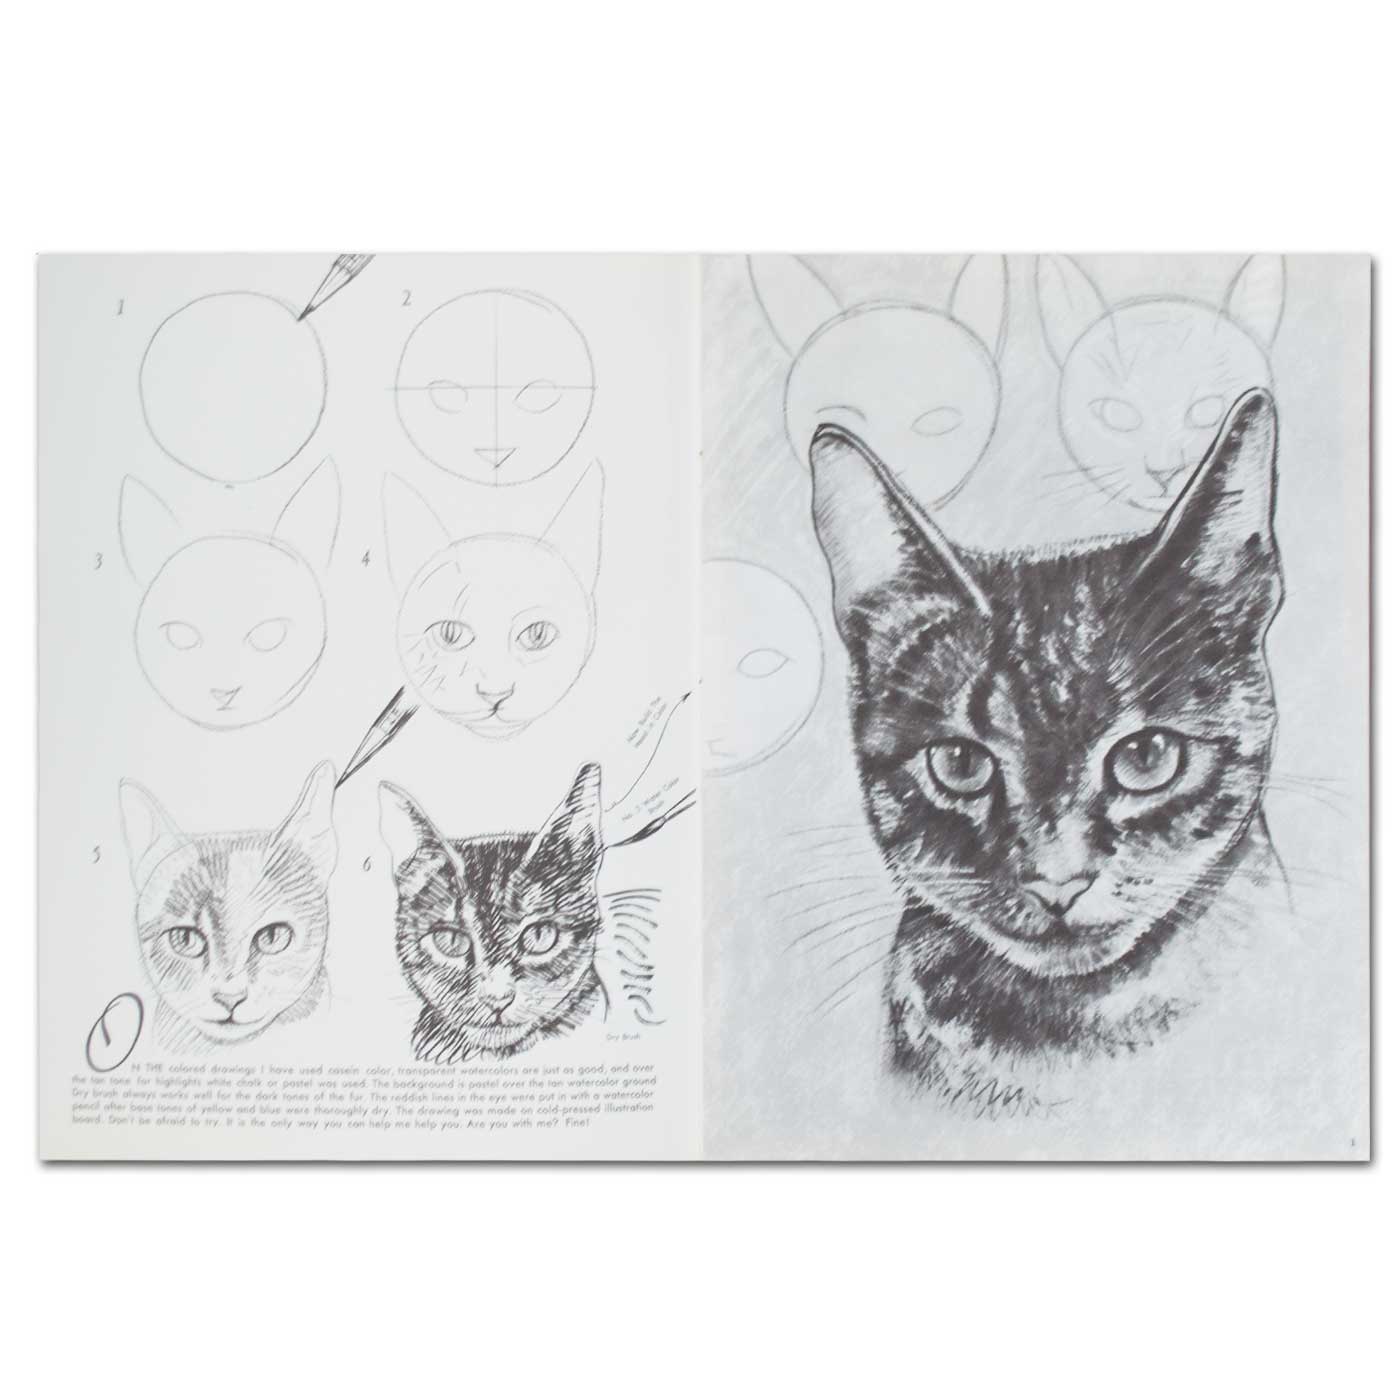 Walter Foster's How to Draw and Paint Cats